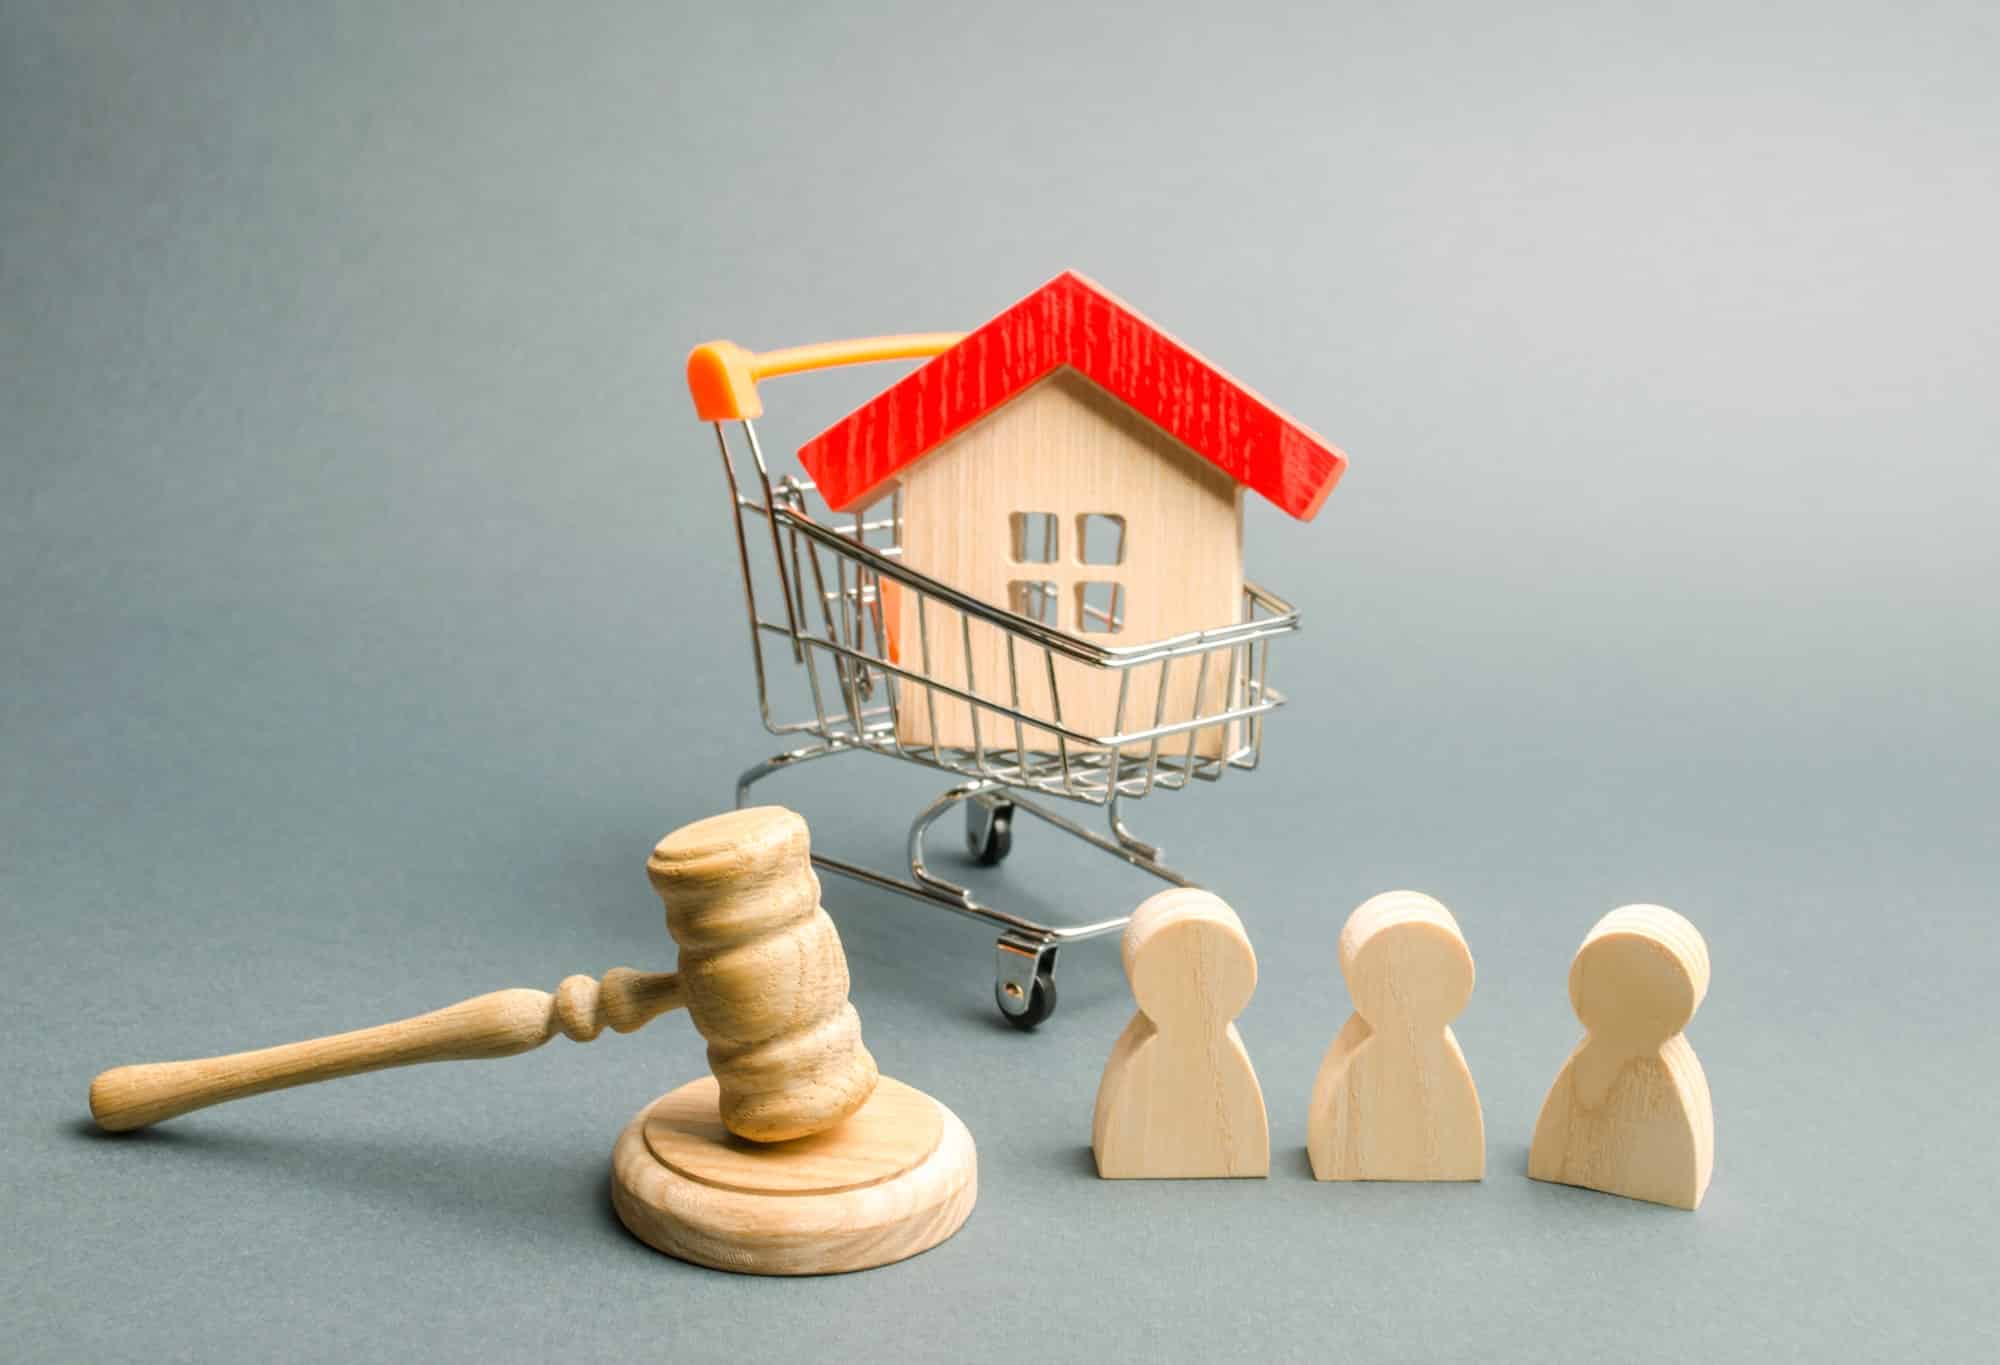 Wooden figures of people, a house in a supermarket trolley and a judge